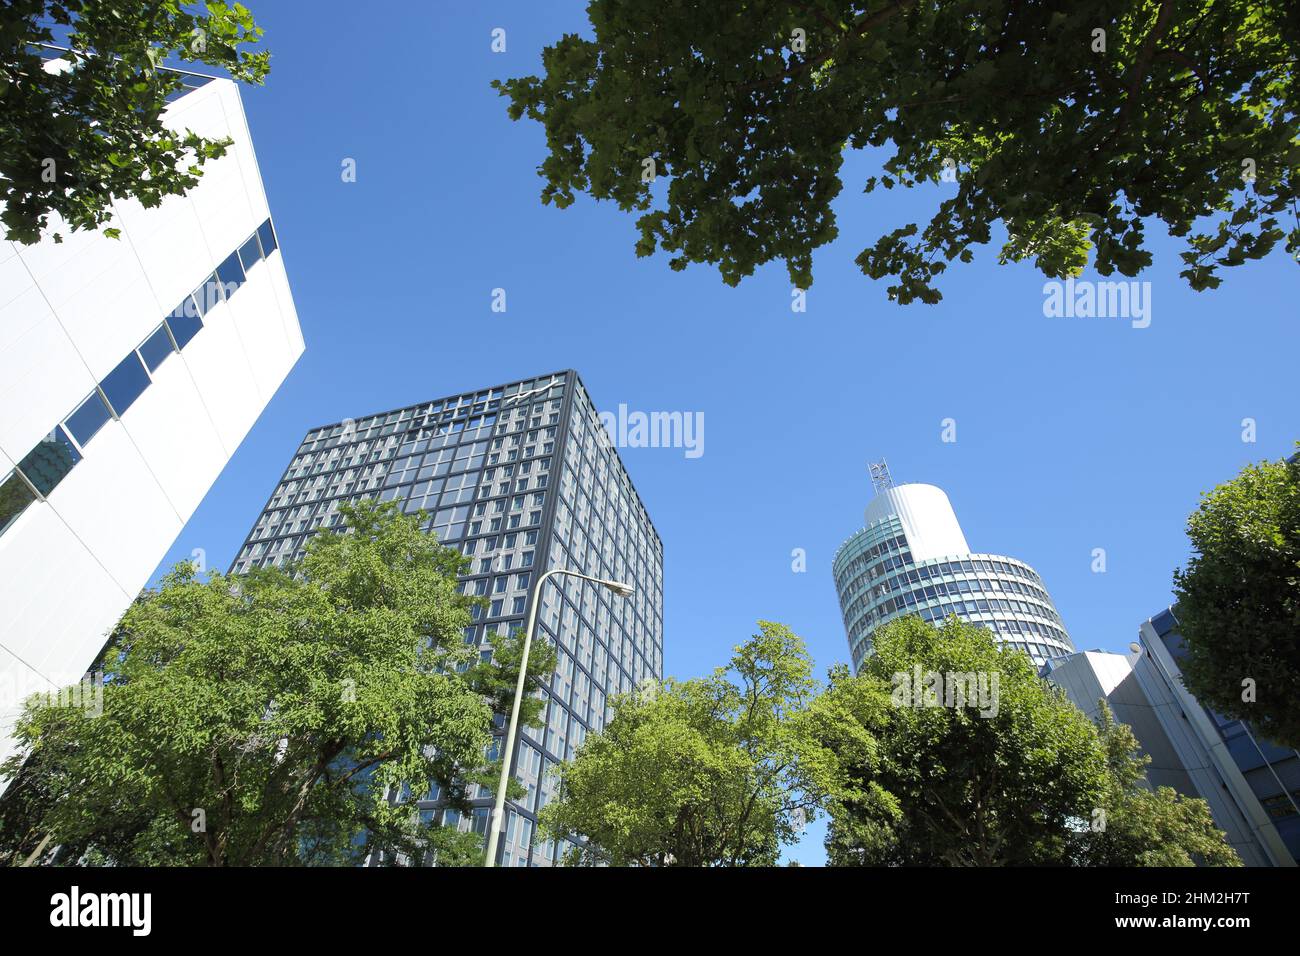 High-rise buildings Taunus Tower 70m and Deutsche Börse Cube 87m in Eschborn, Hesse, Germany Stock Photo